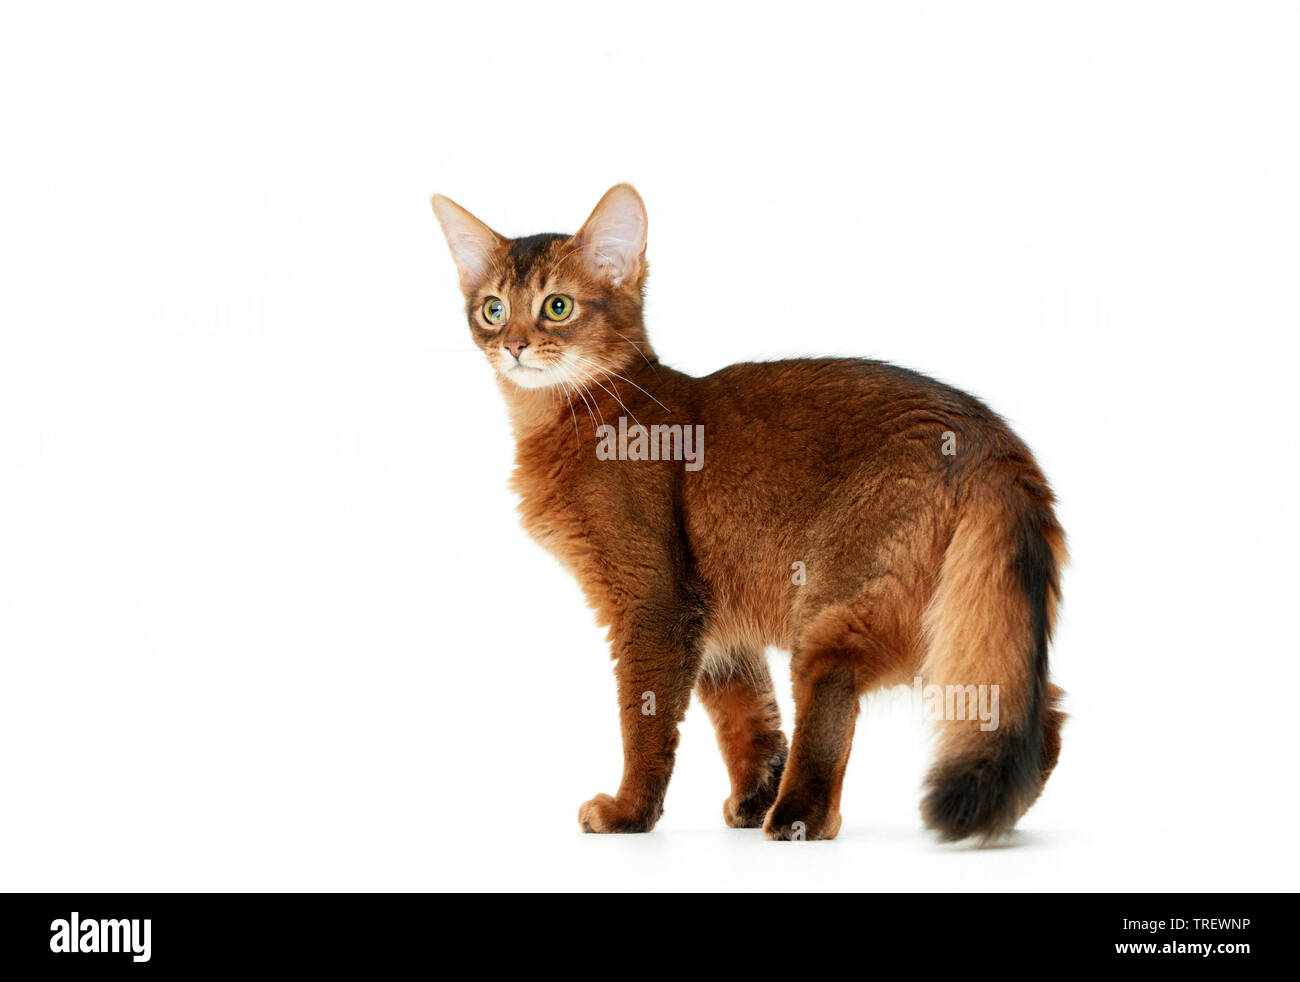 Somali cat. Kitten standing, seen side-on. Studio picture against a white background Stock Photo